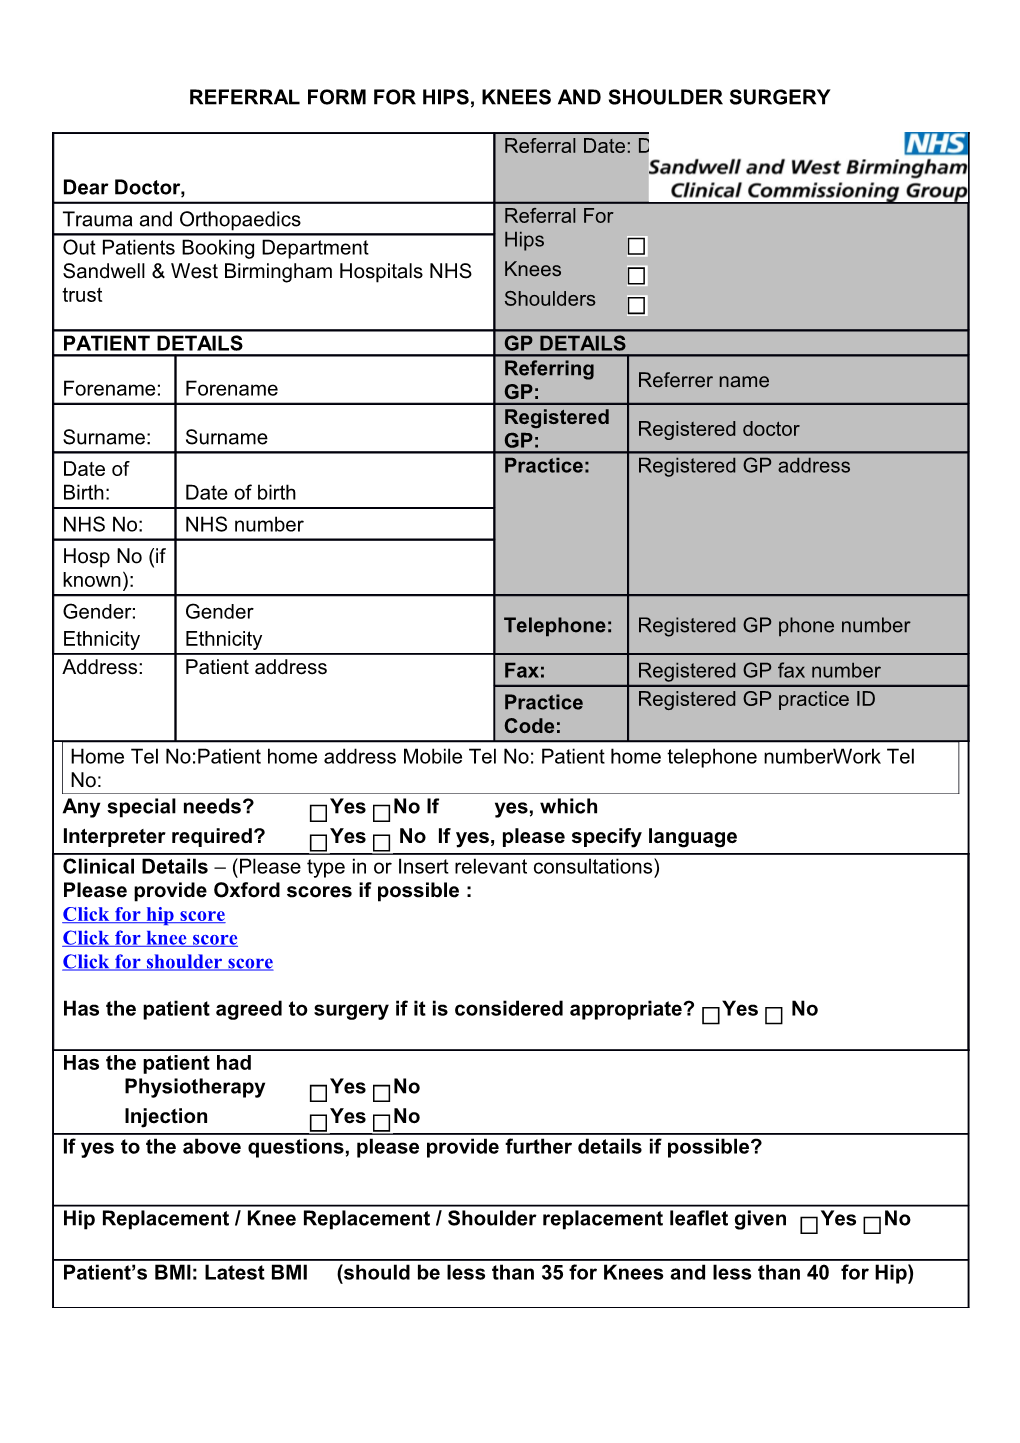 Referral Form for Hips, Knees and Shoulder Surgery